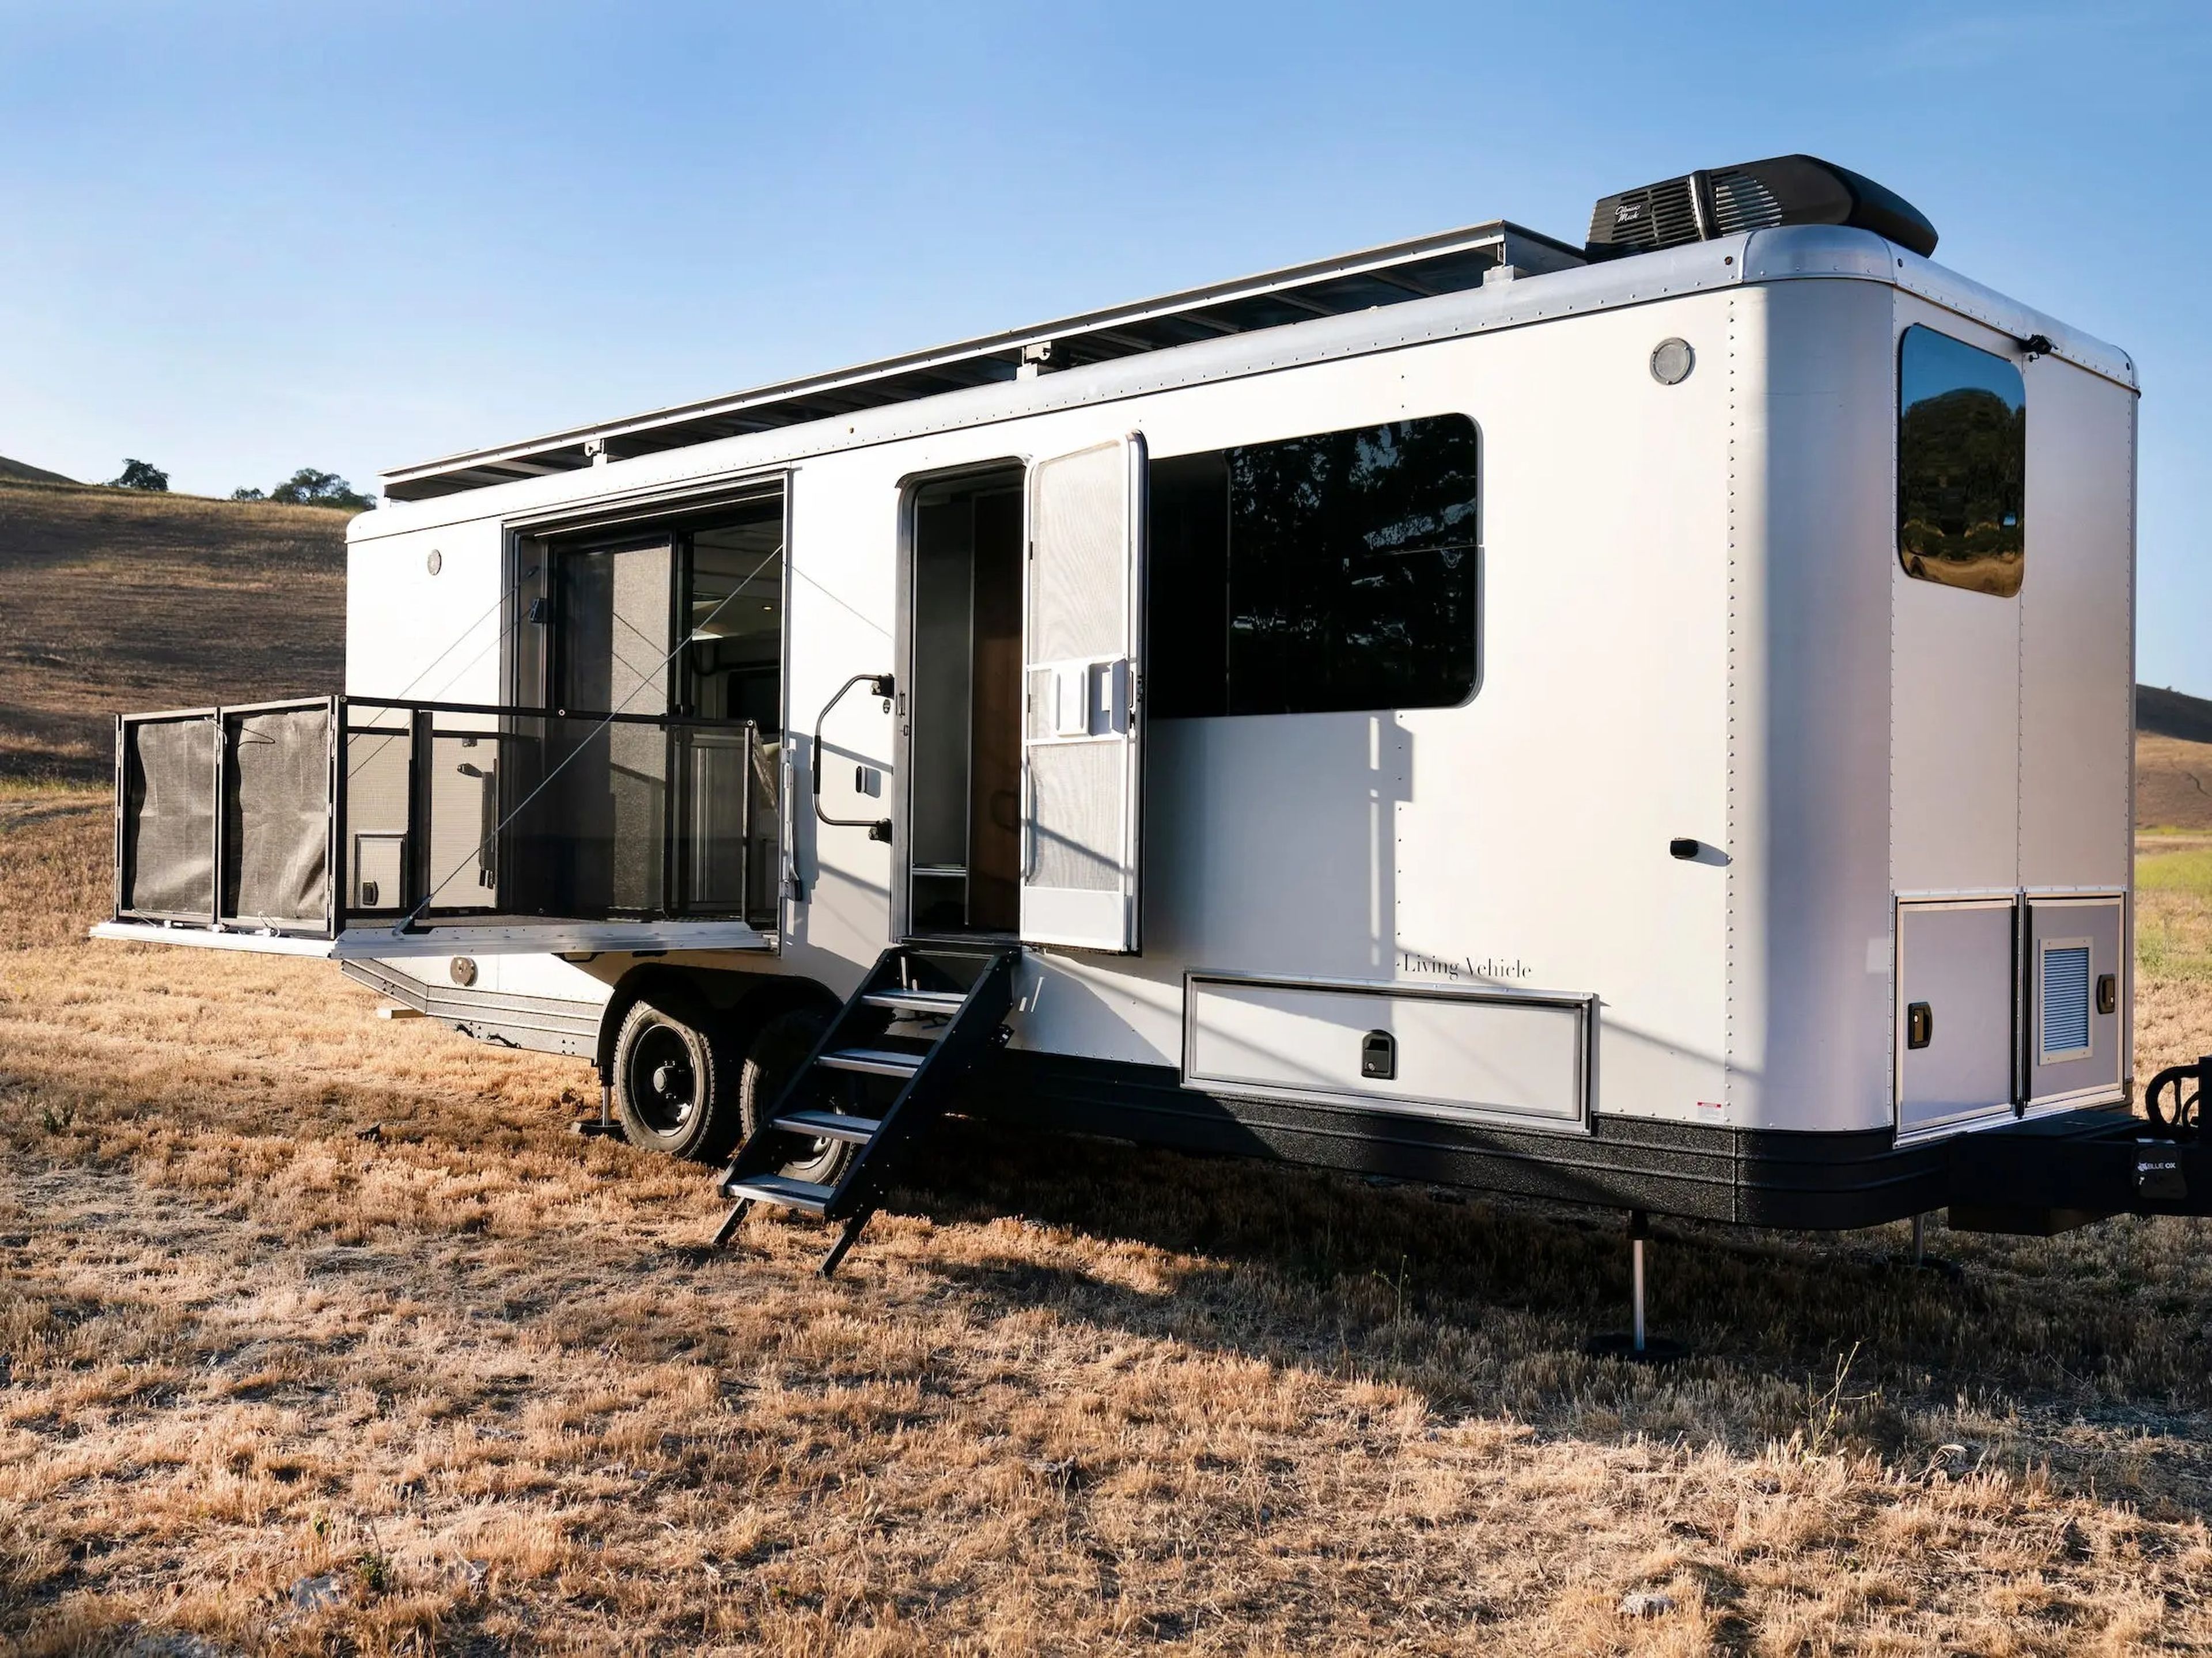 The exterior of the travel trailer as it sits on a brown field. The patio is extended.